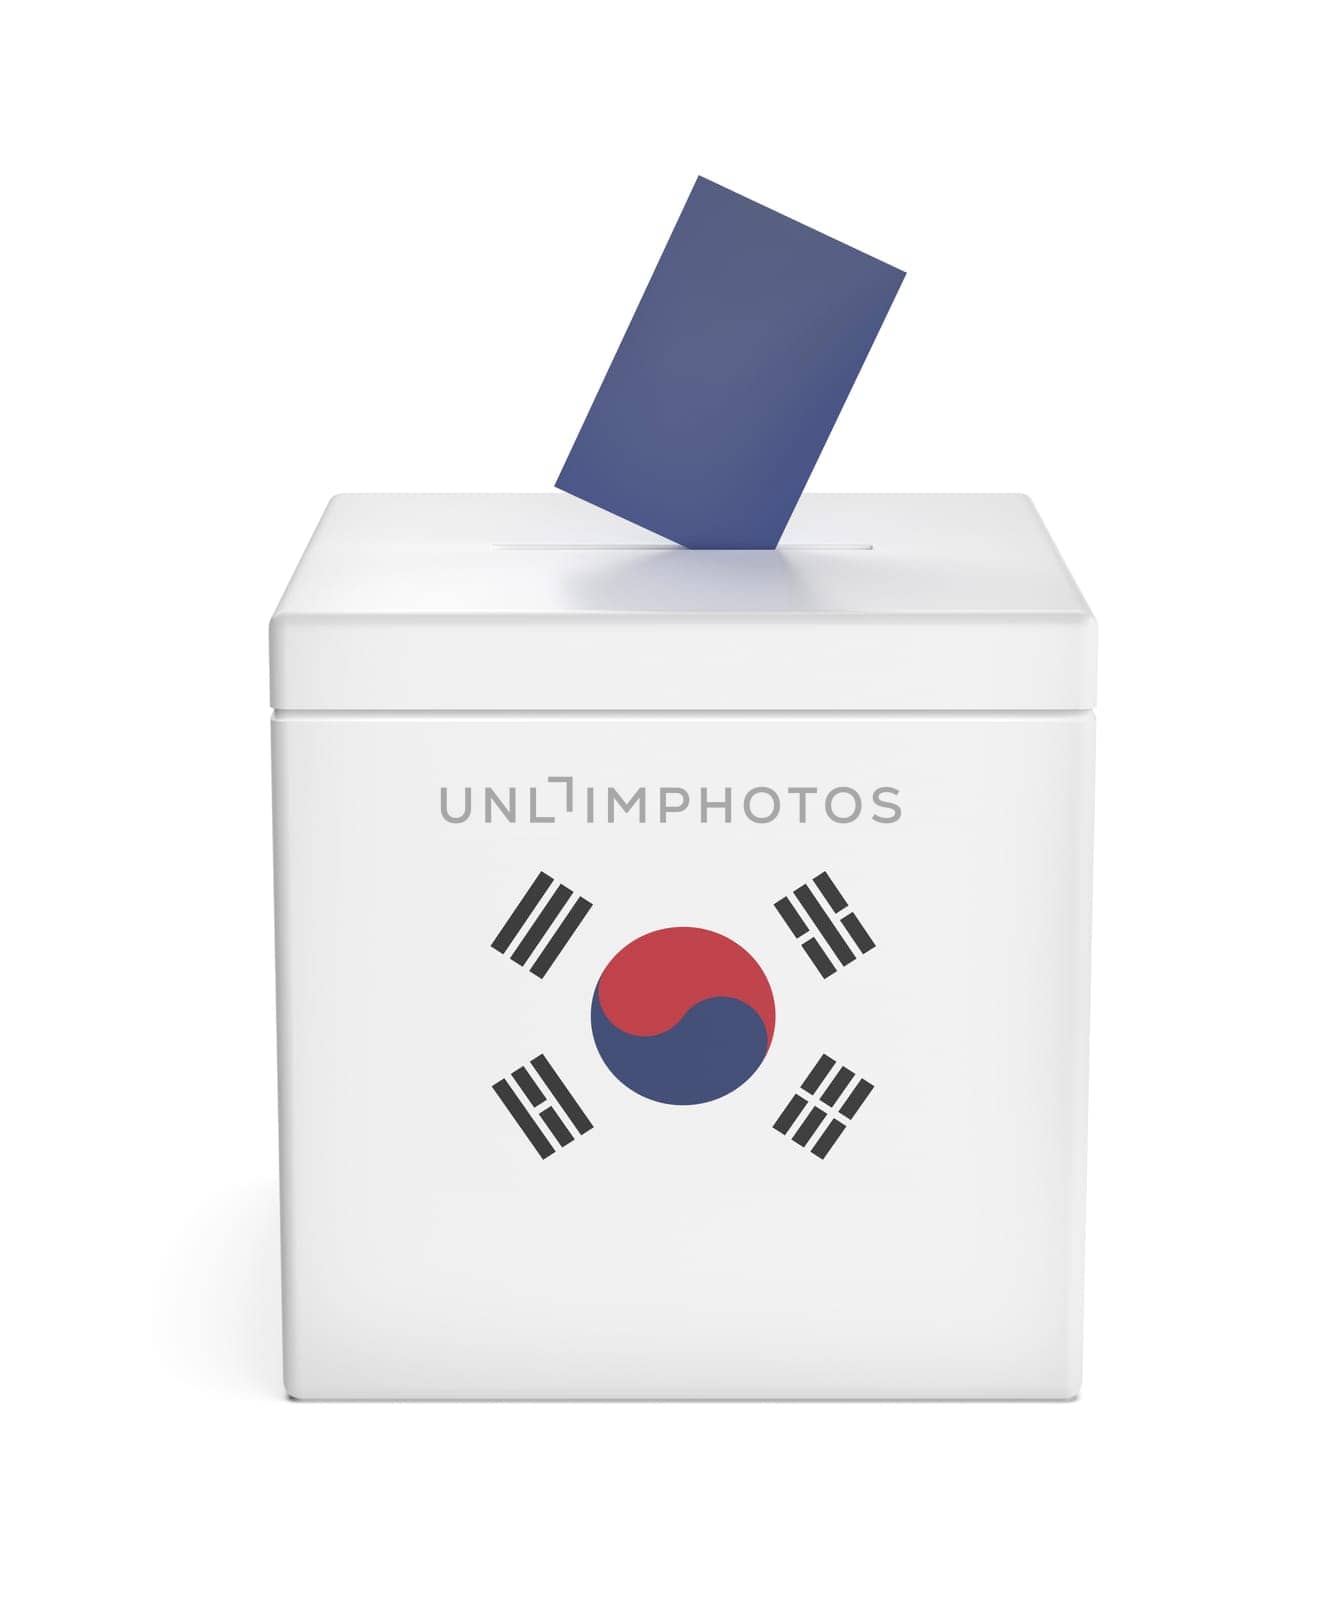 Concept image for elections in South Korea